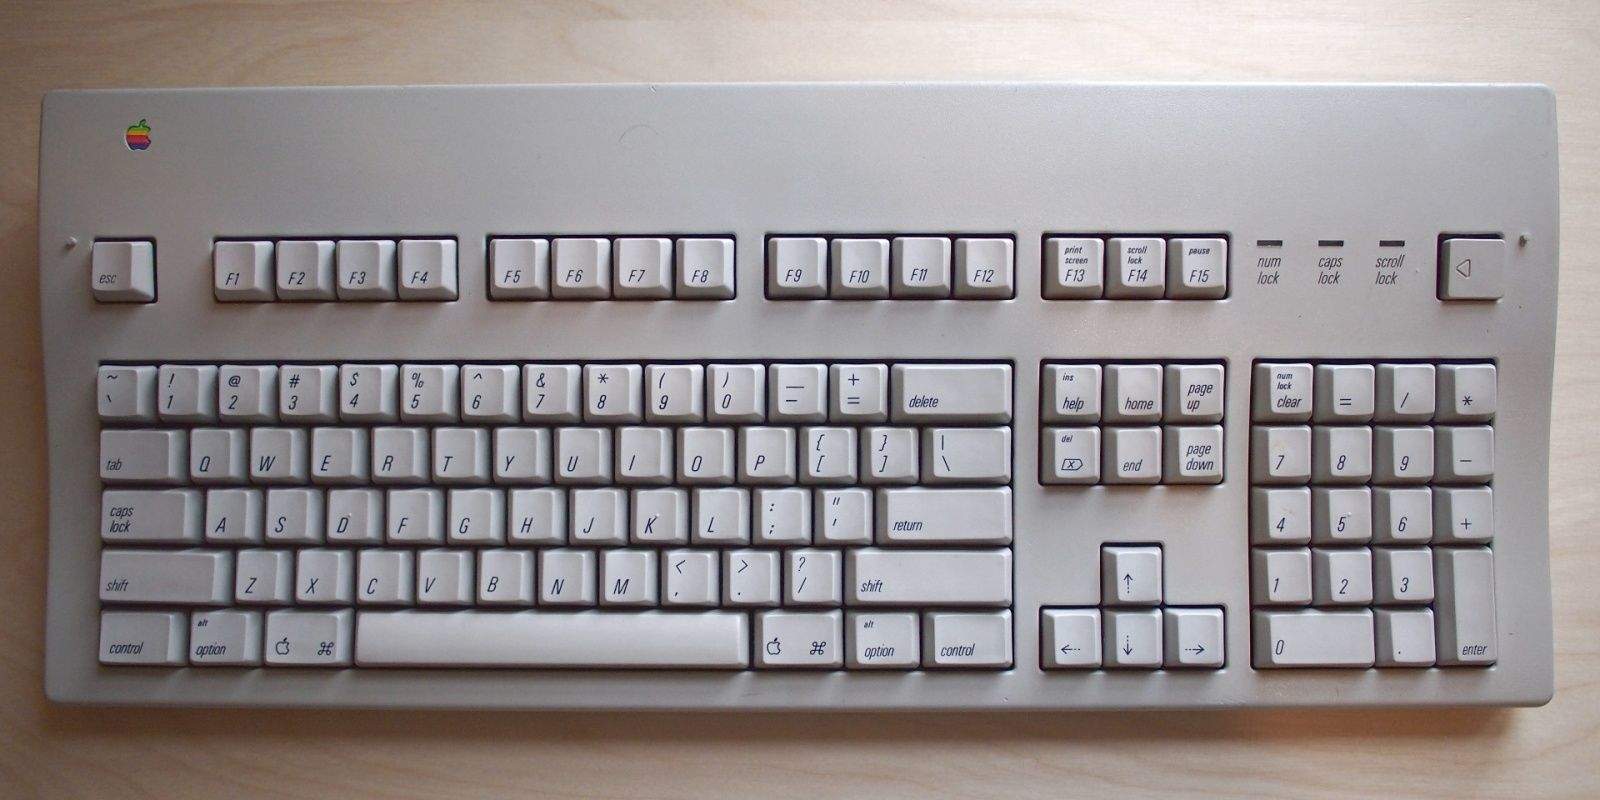 How To Turn Apple U0026 39 S Best Keyboard Into A Fully